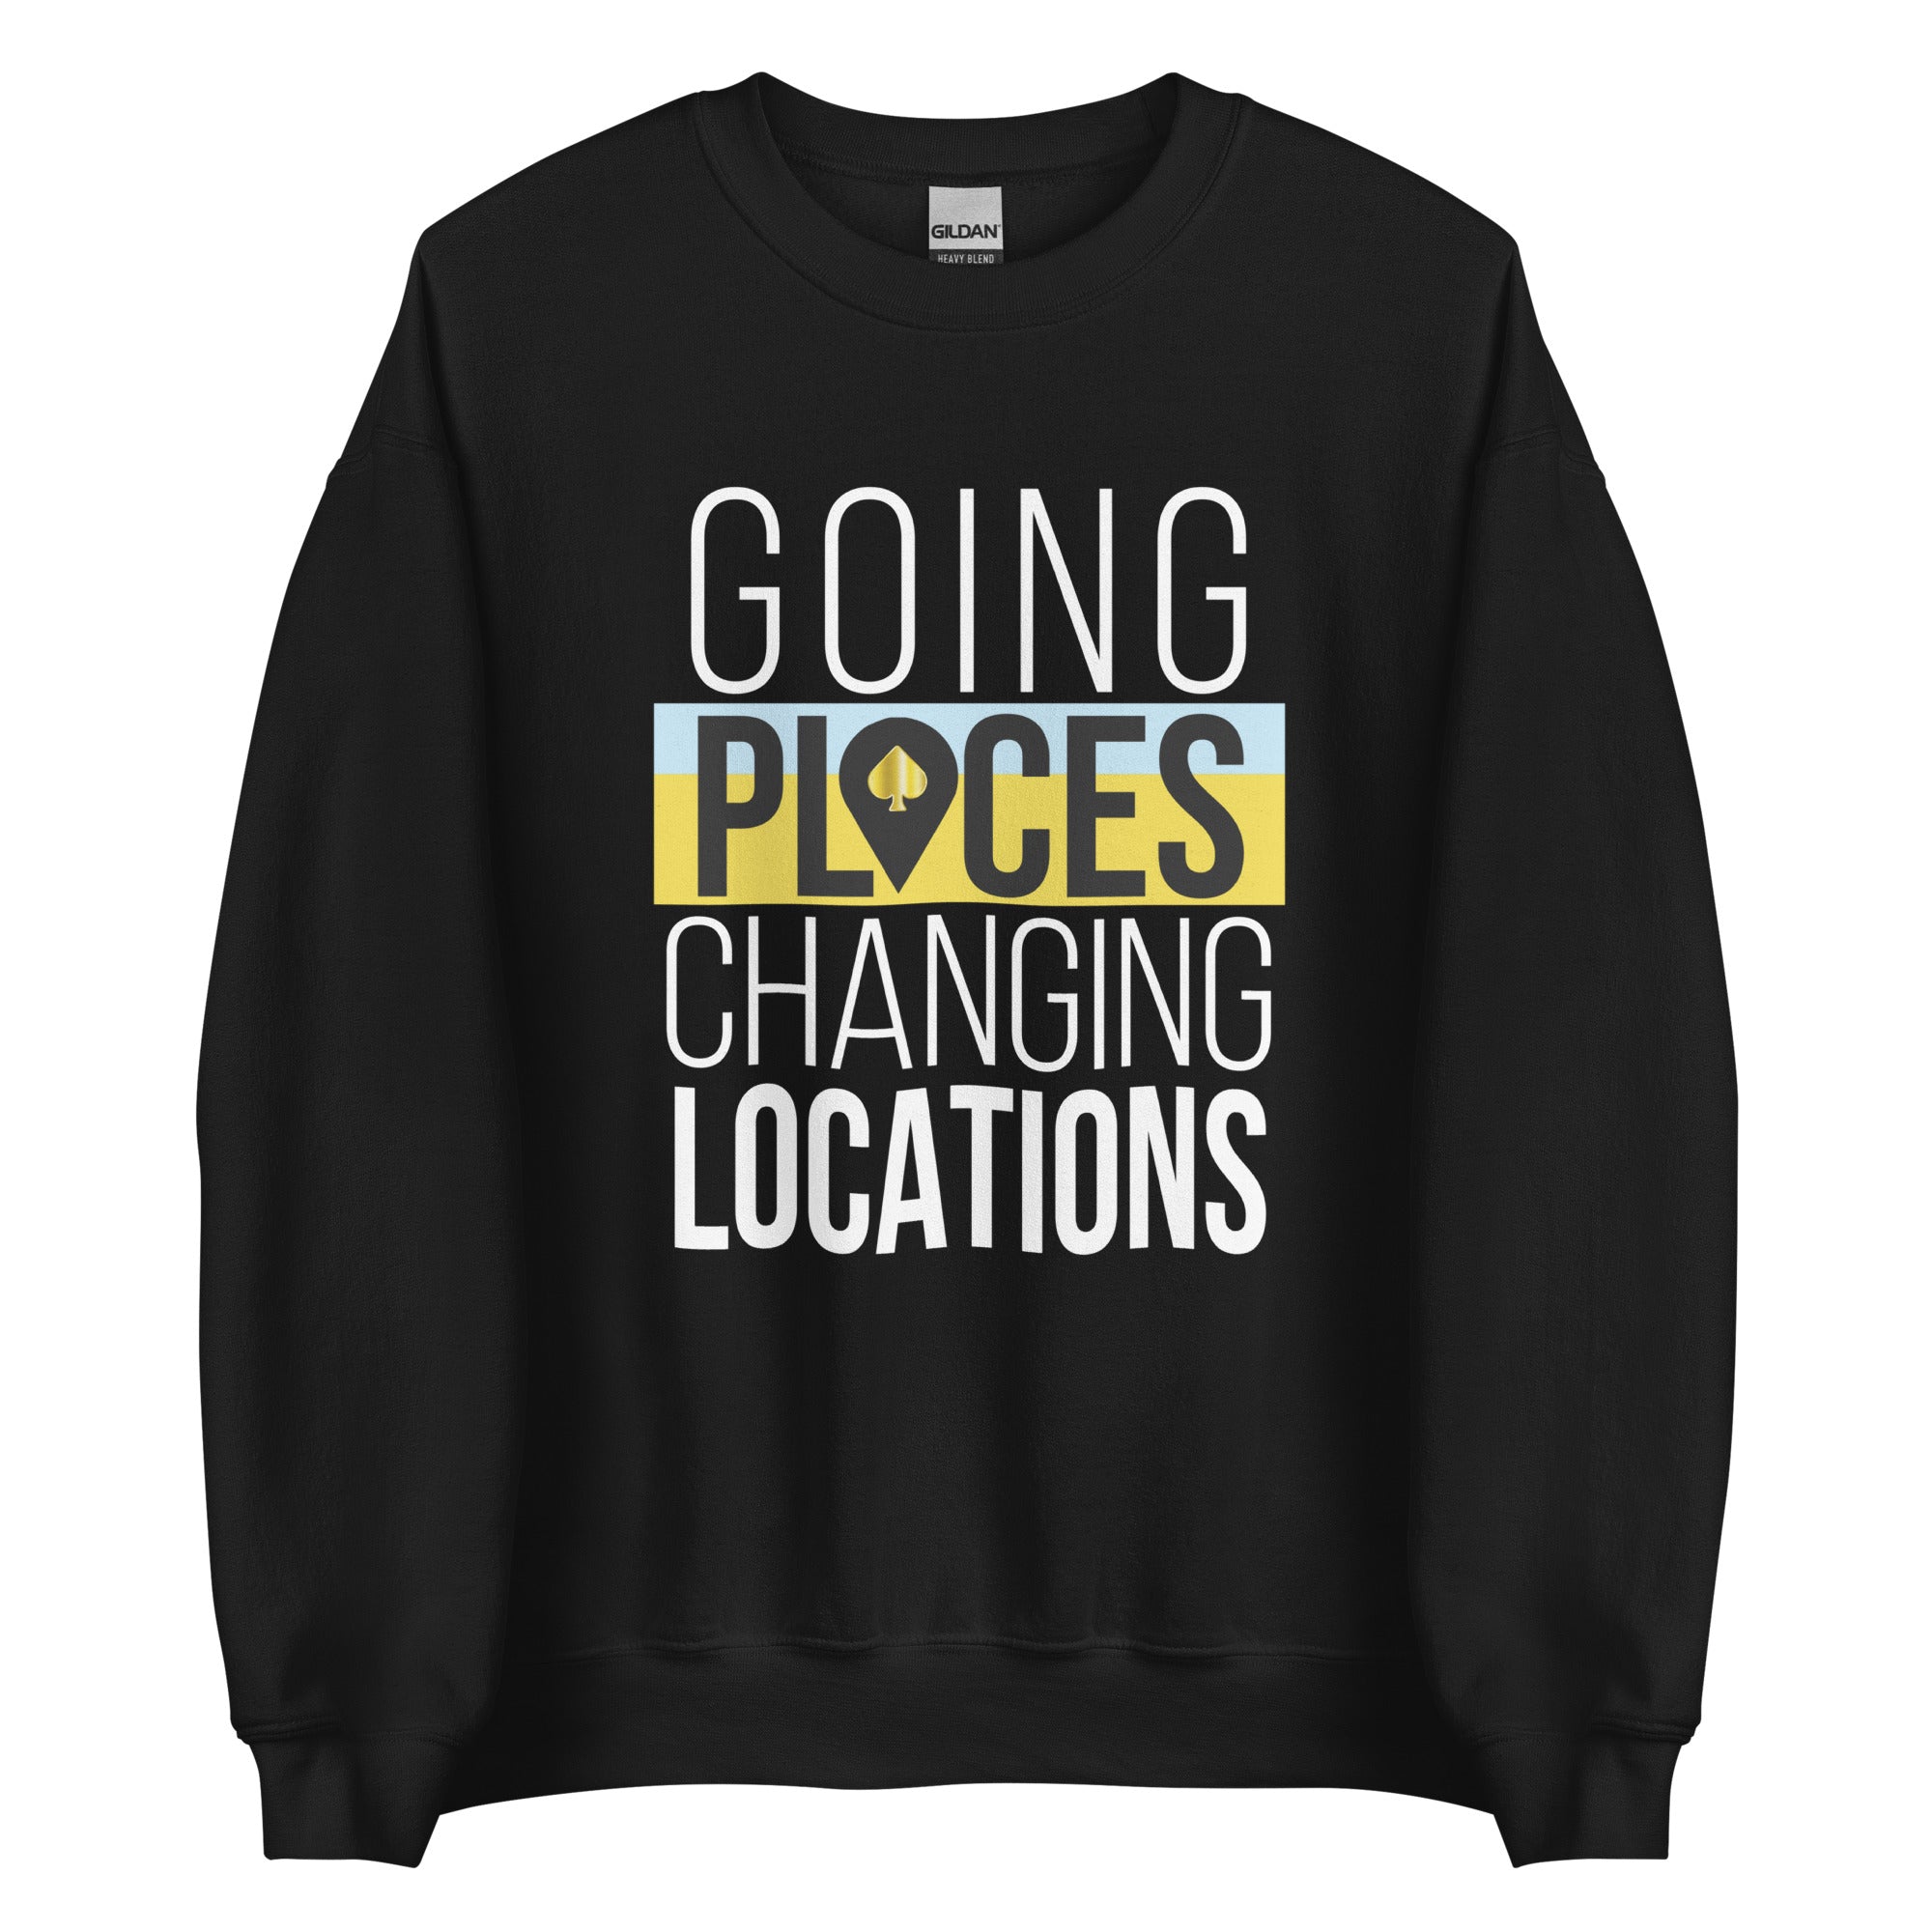 Going Places, Changing Locations Unisex Sweatshirt